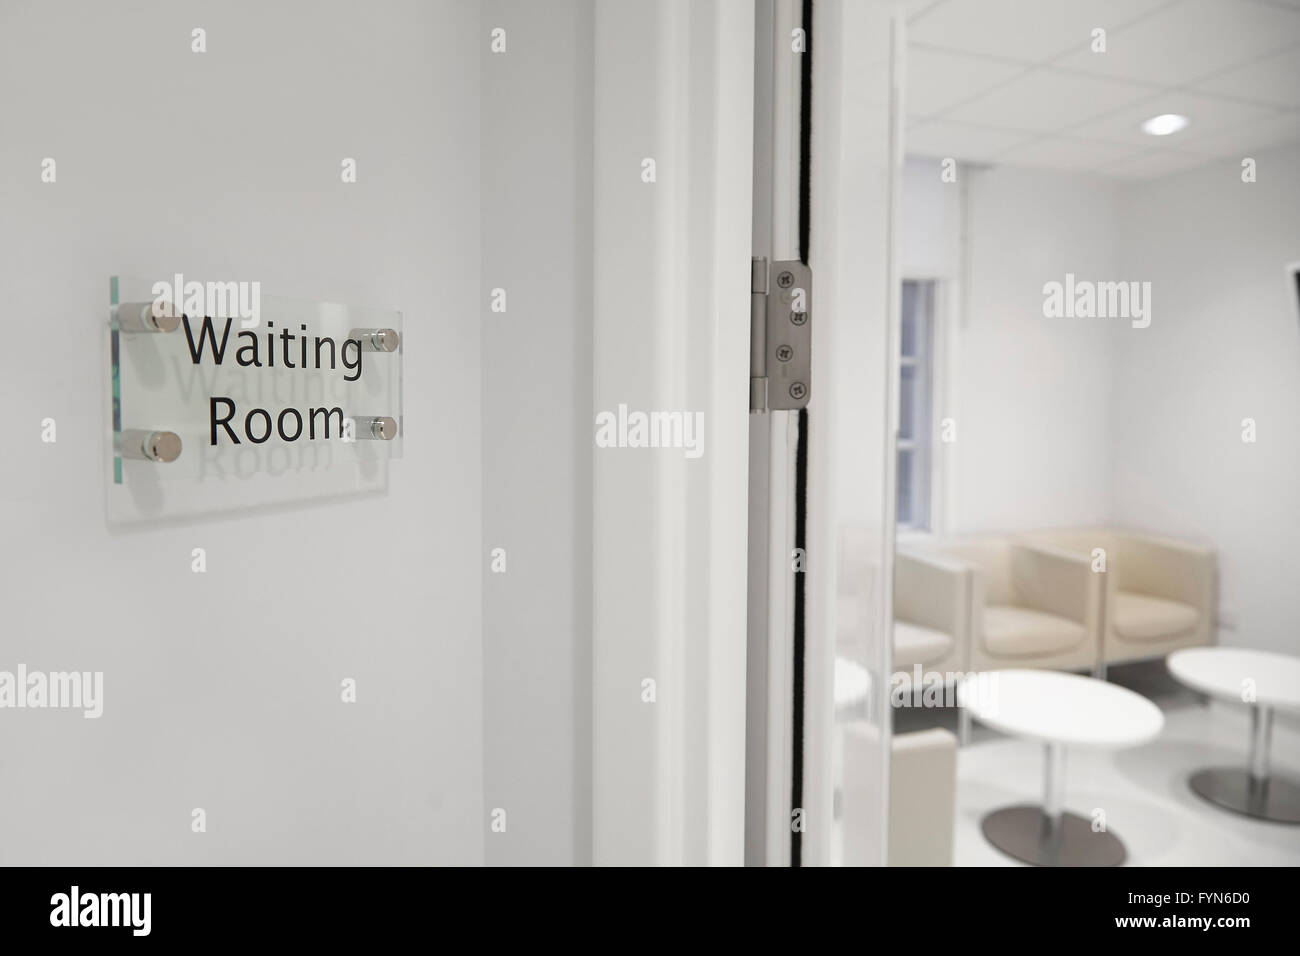 A waiting room sign outside an empty room. Stock Photo